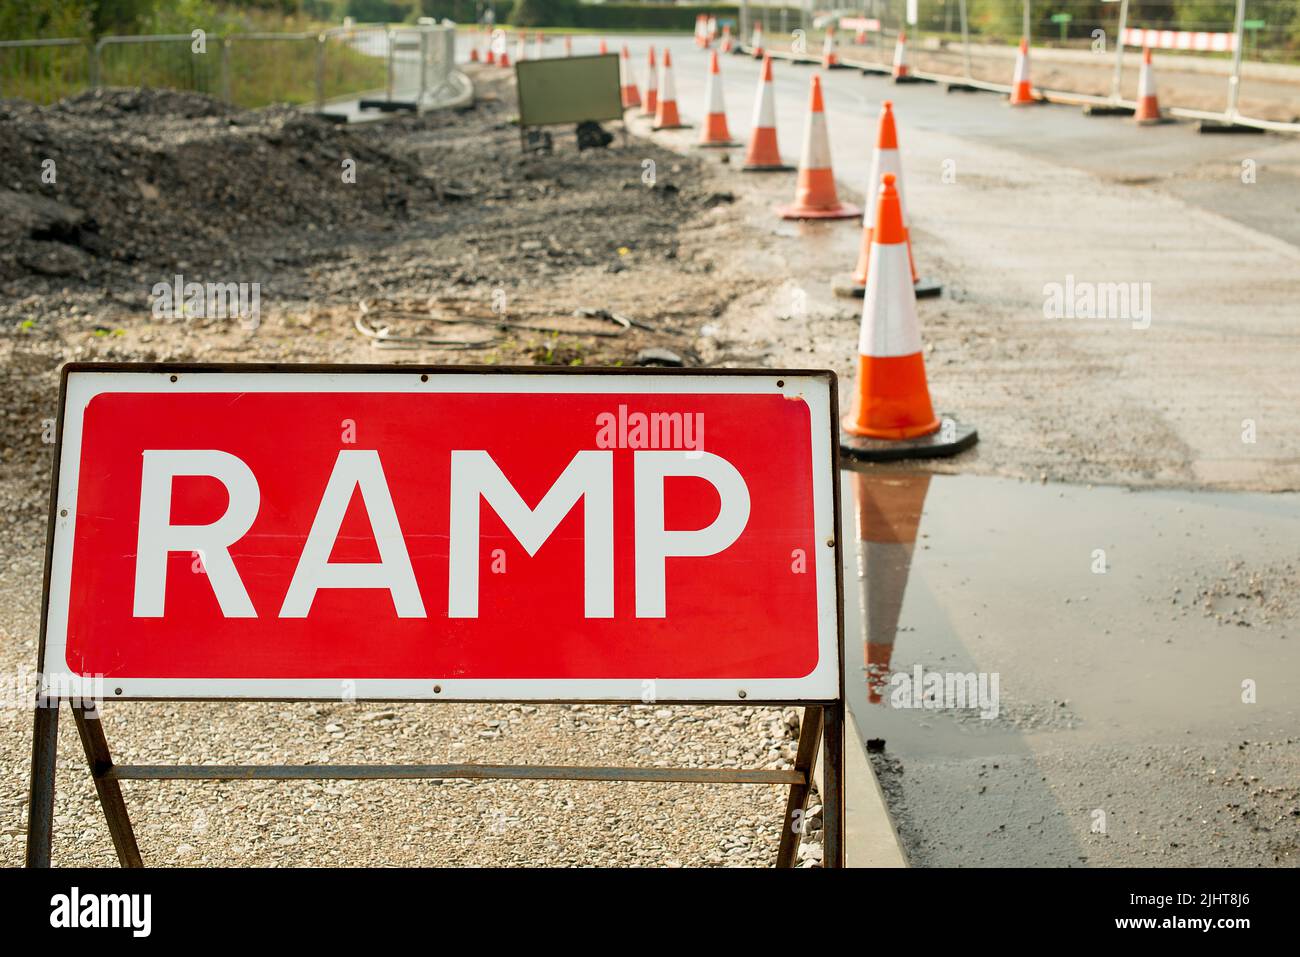 Roadside RAMP Sign with traffic cones and road resurfacing work in the background. Stock Photo